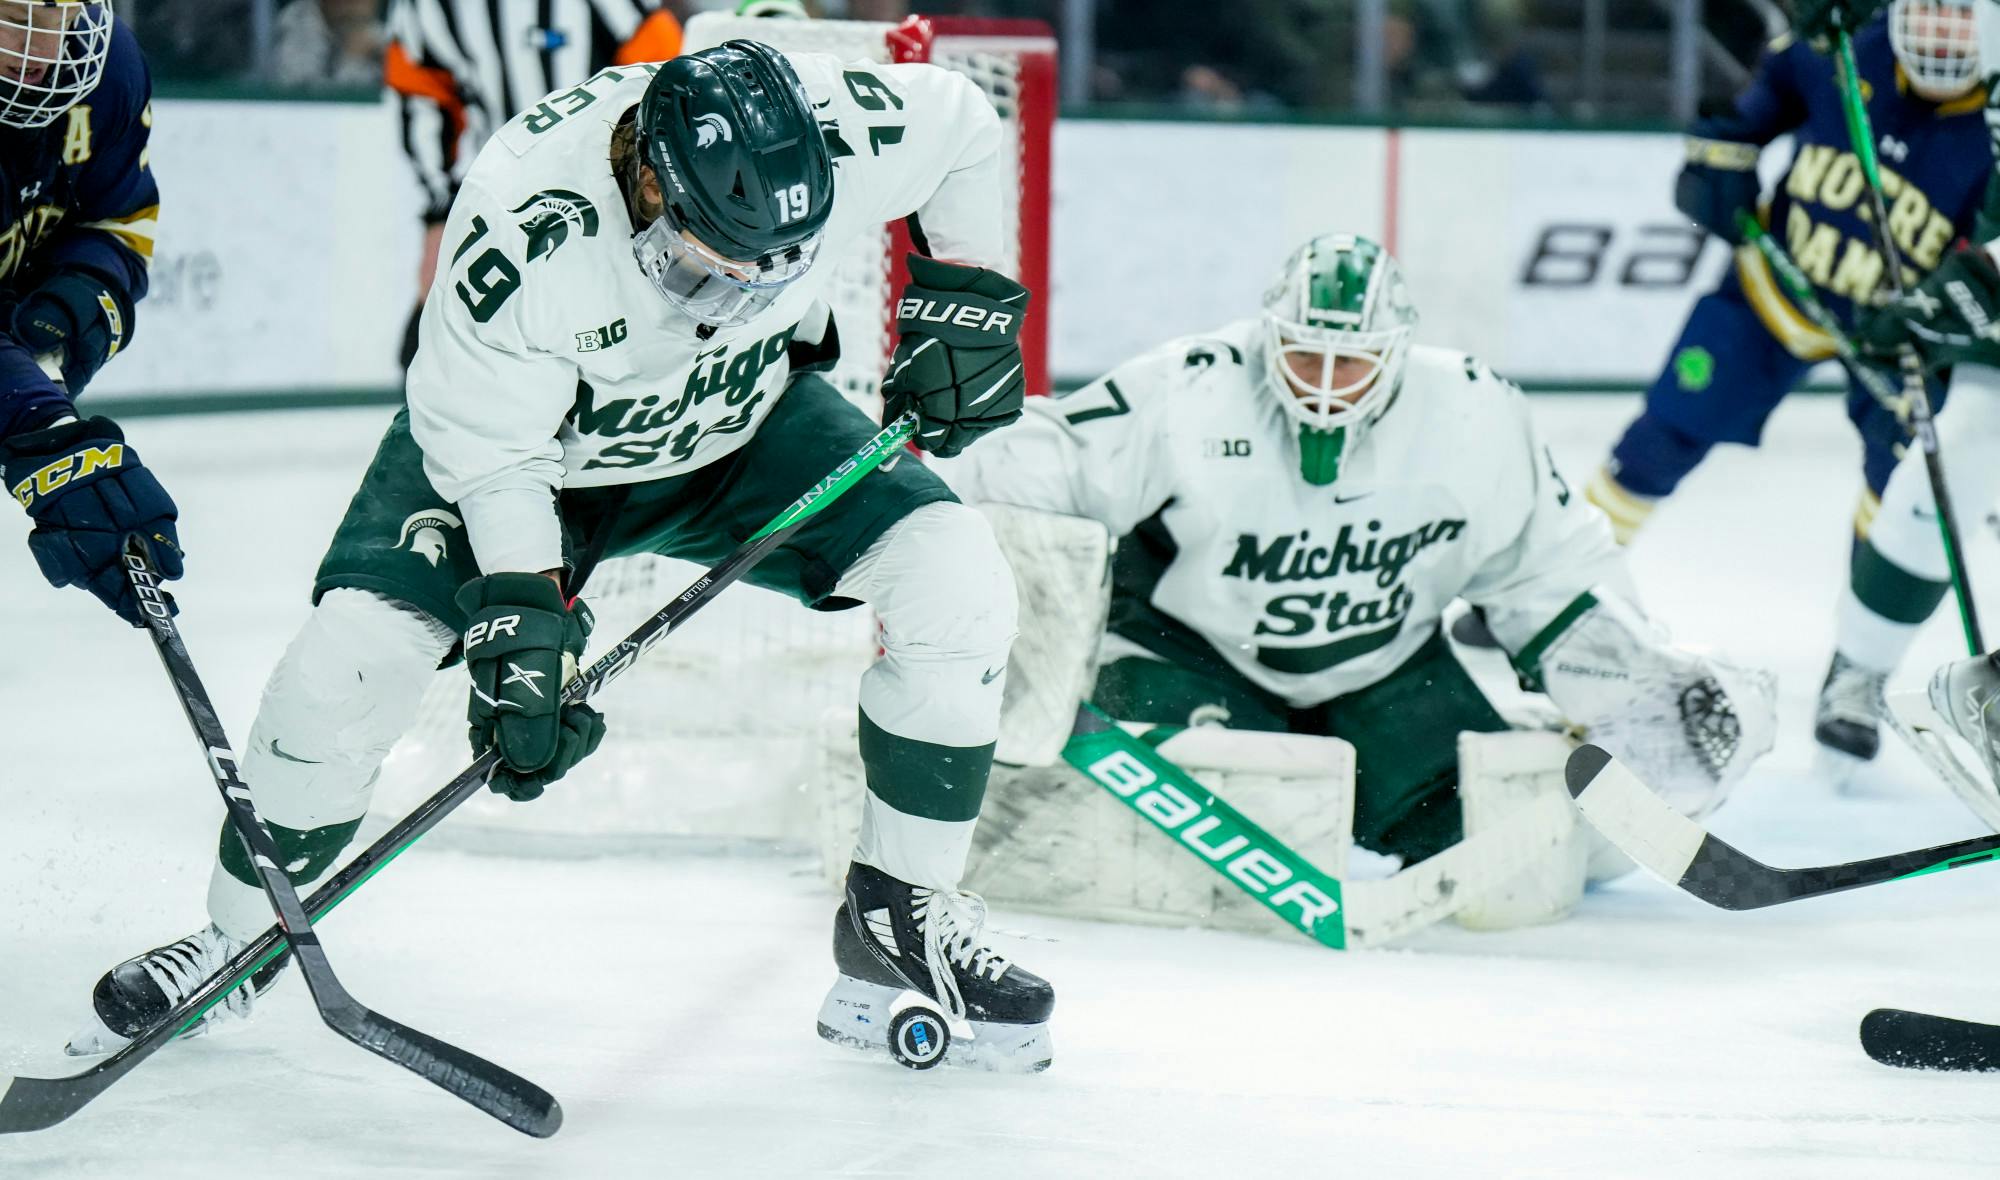 <p>Senior forward Nicolas Müller (19) is about to pass the puck during a game against Notre Dame at Munn Ice Arena on Feb. 3, 2023. The Spartans defeated the Fighting Irish 3-0.</p>